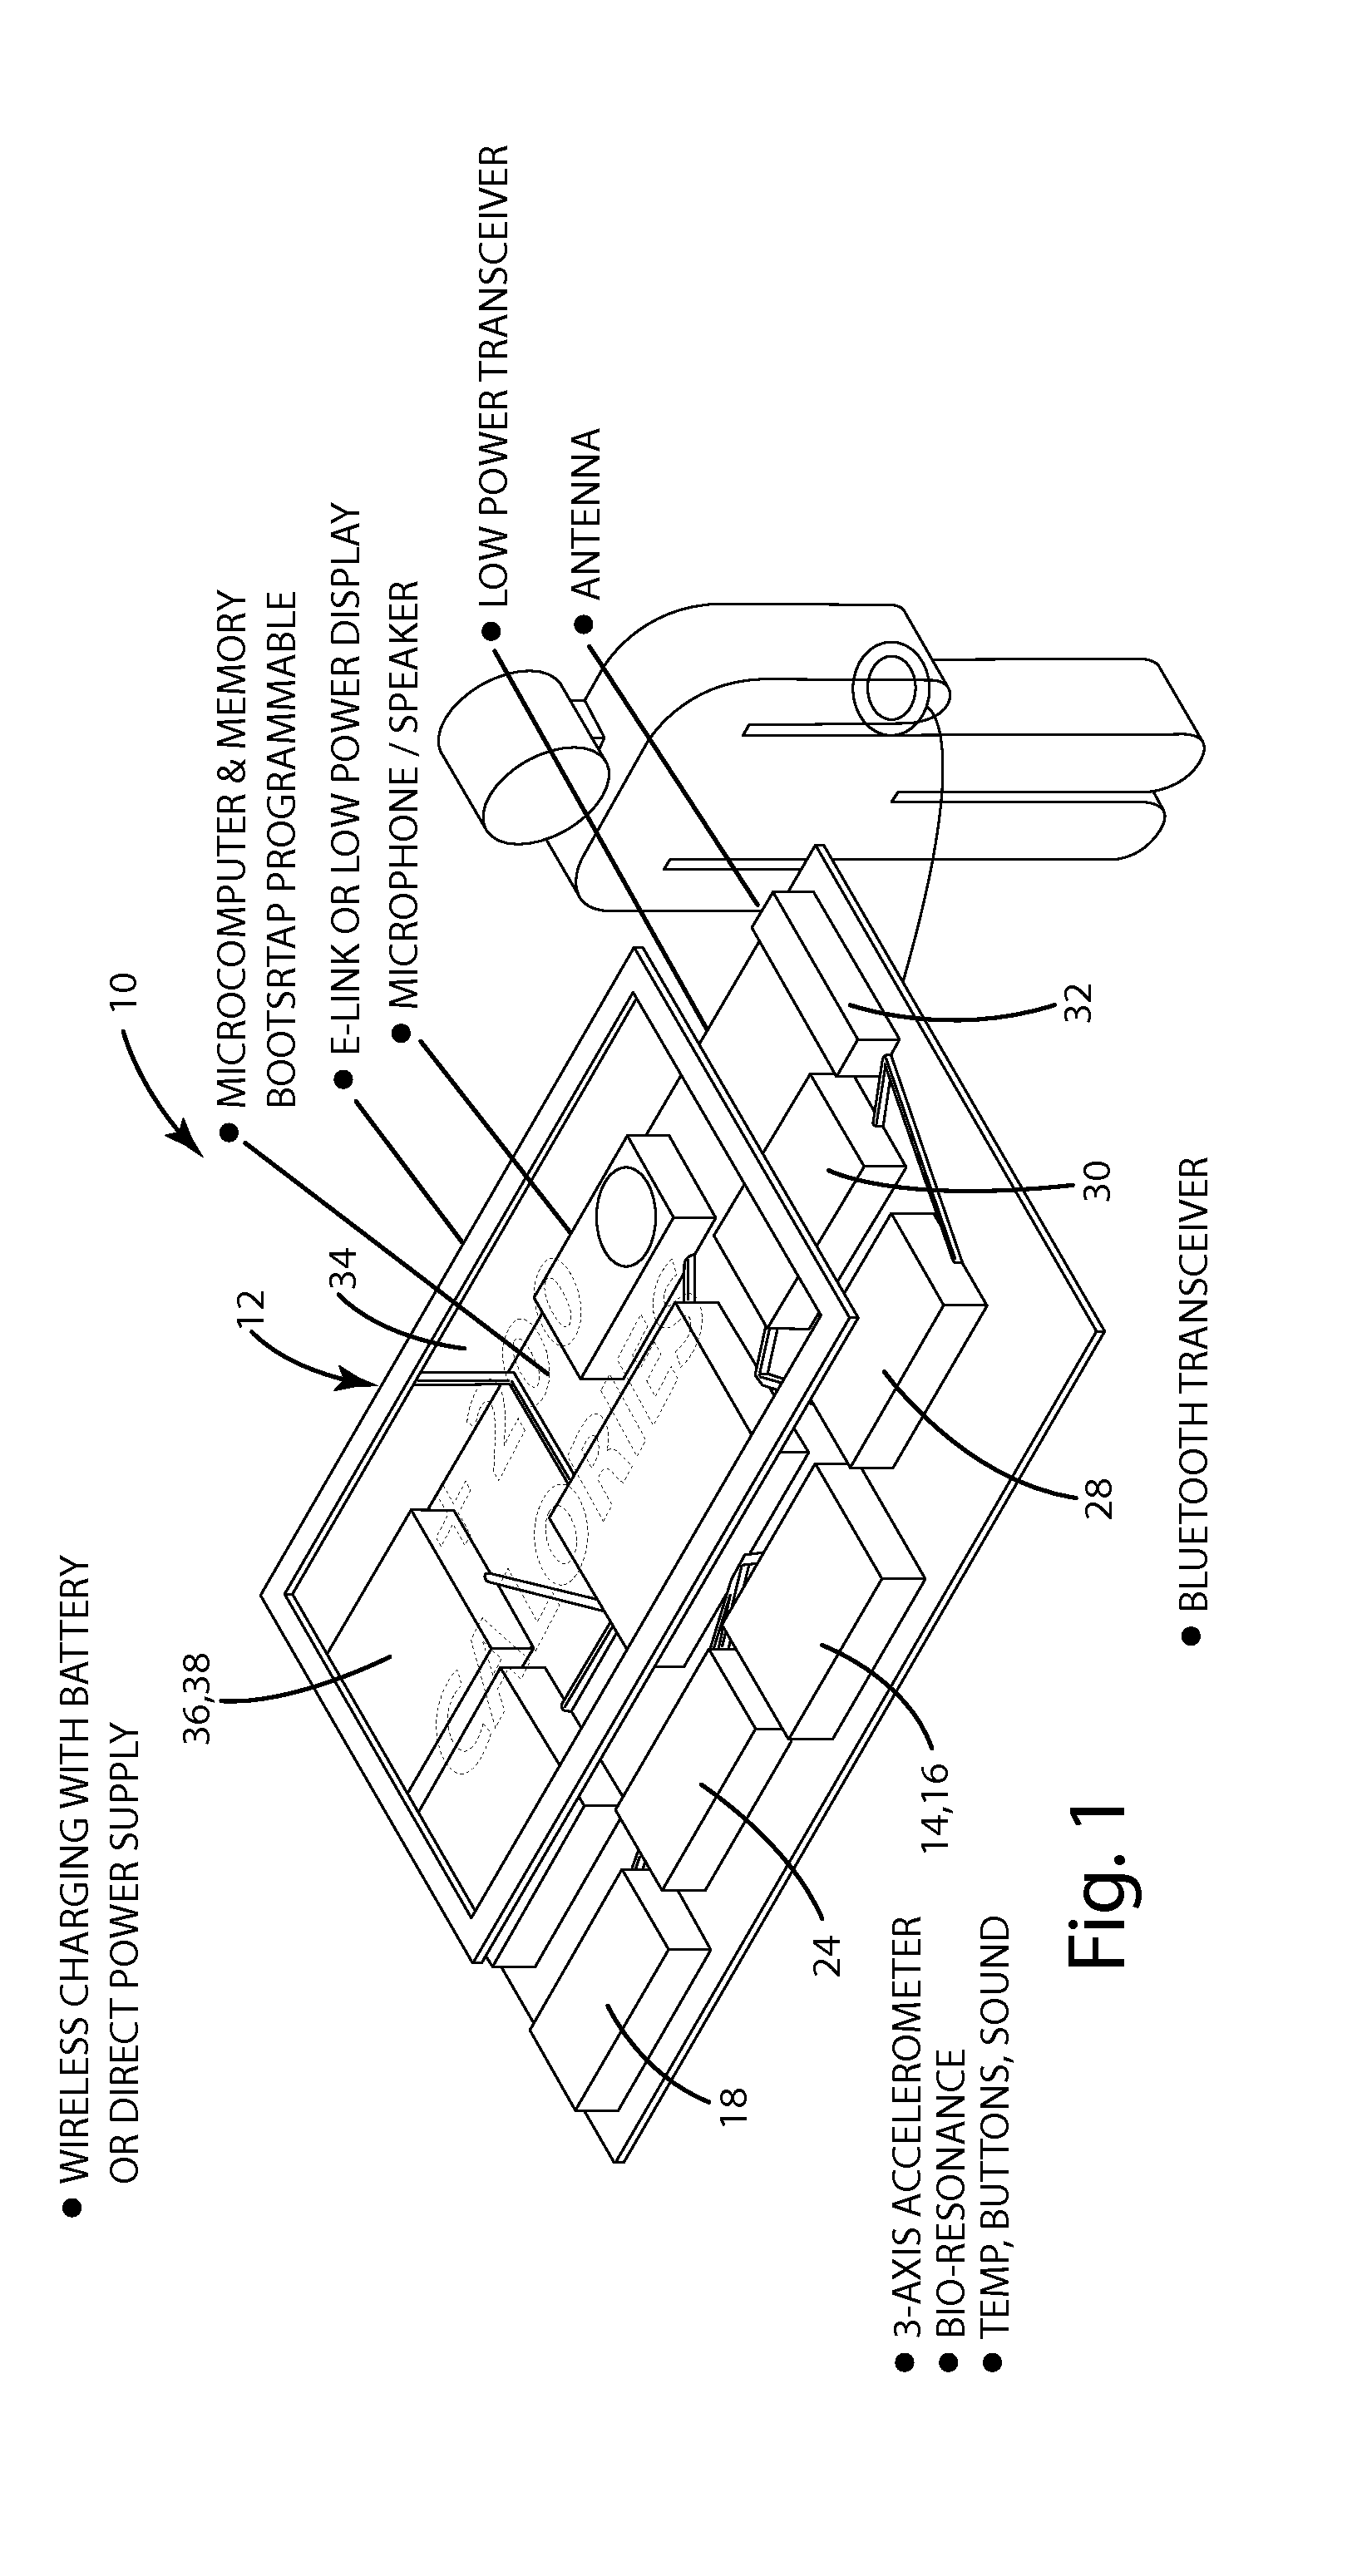 System and method of approximating caloric energy intake and/or macronutrient composition